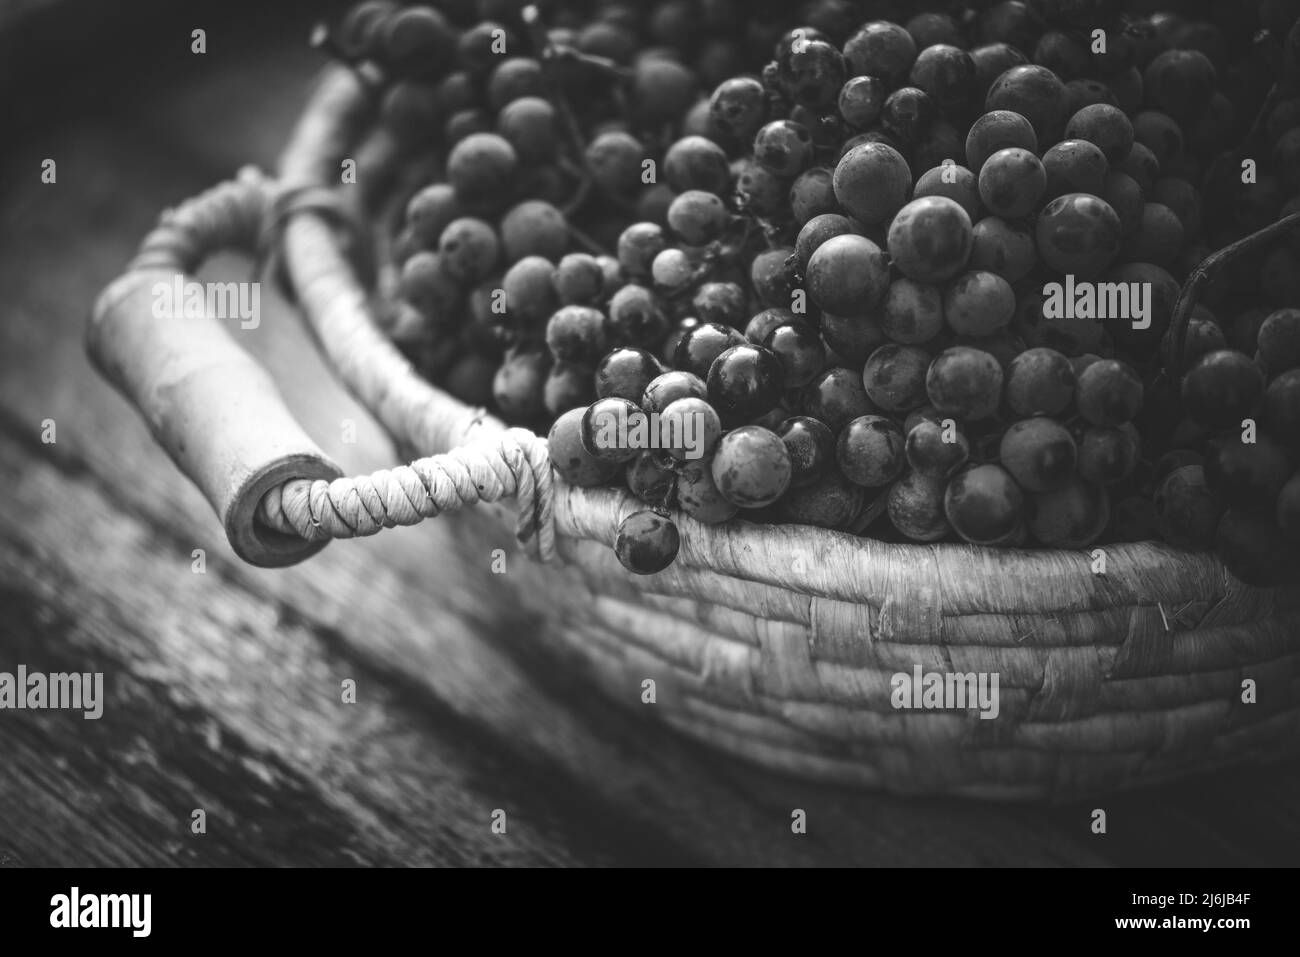 Grapes on the basket on the wooden table Stock Photo